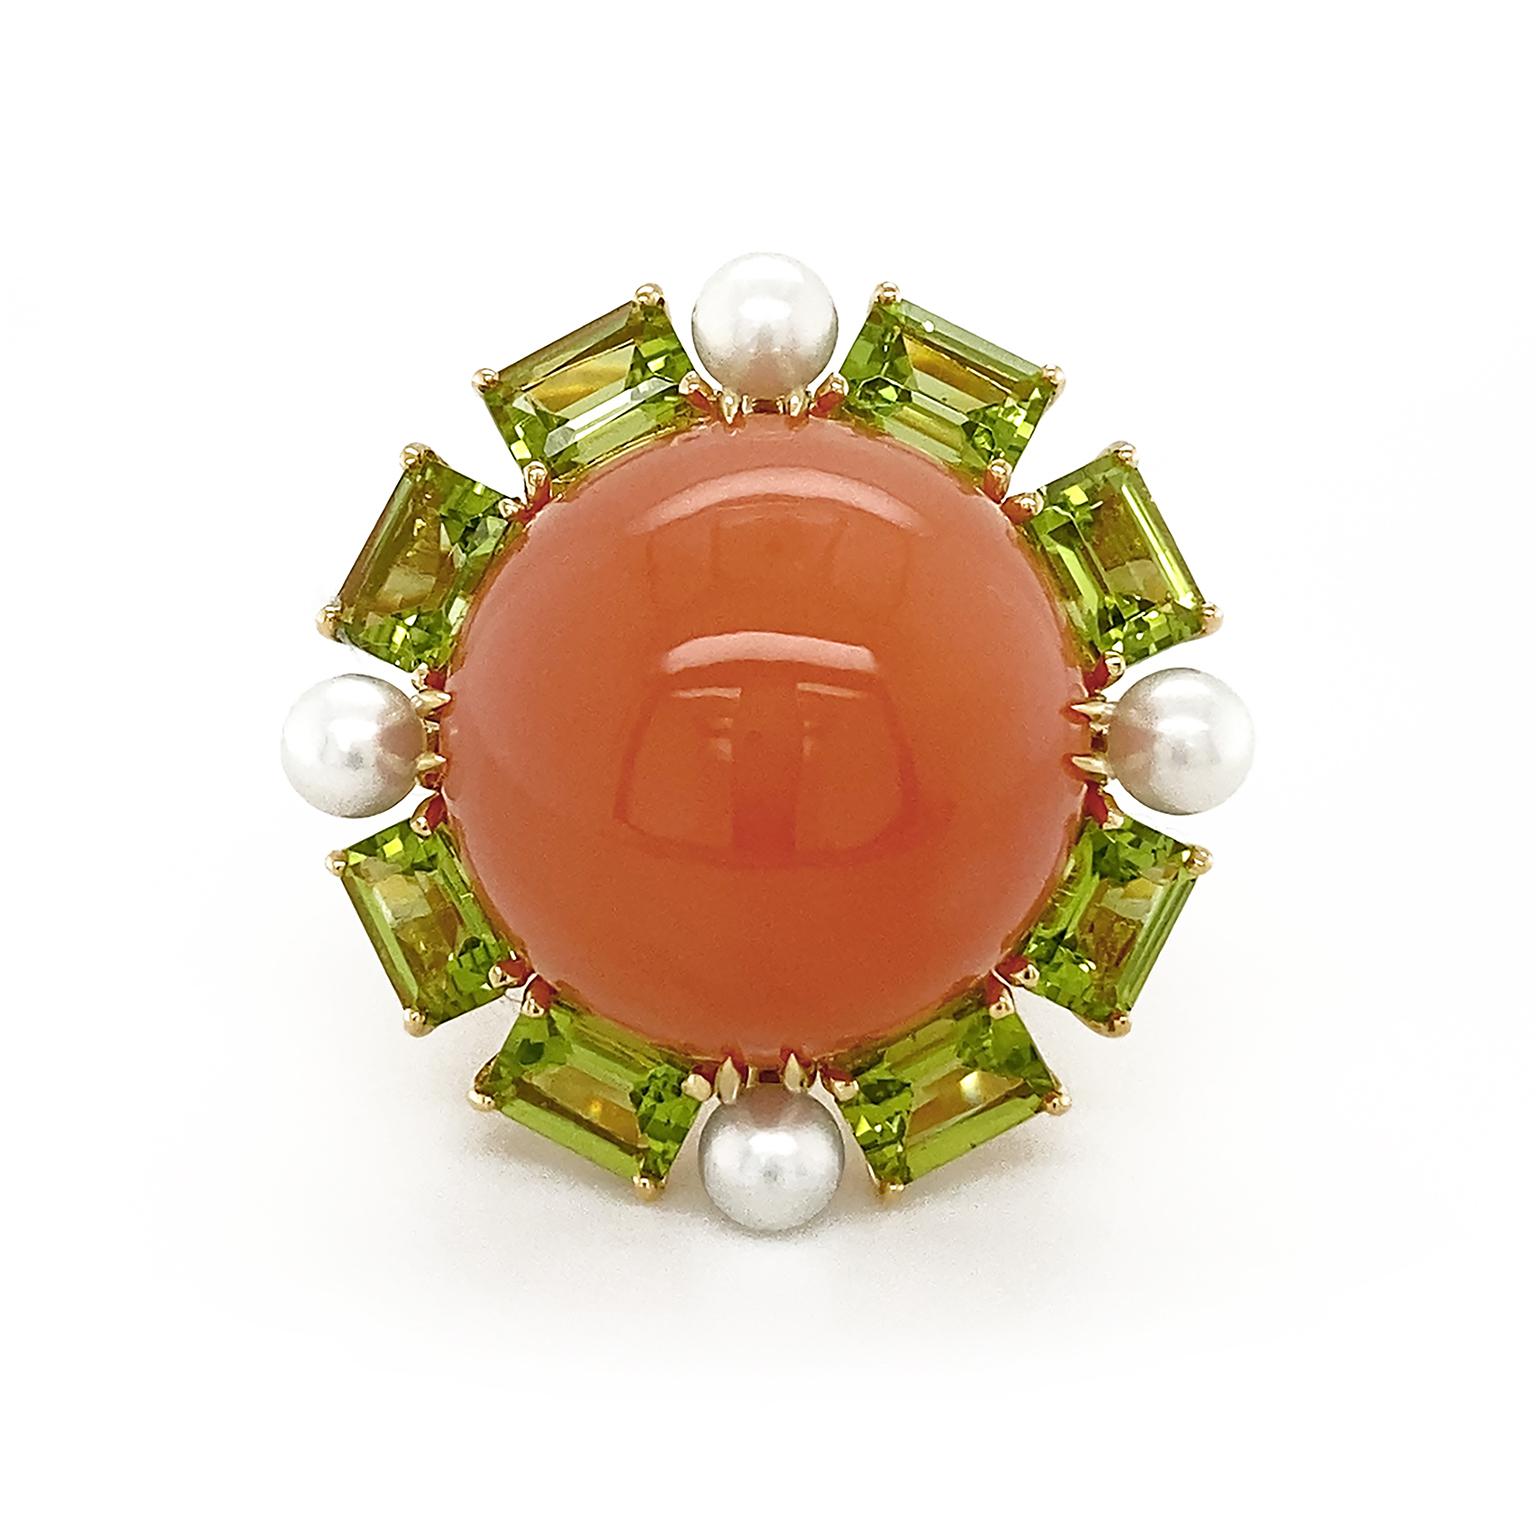 As the crown, orange moonstone is carved into a polished round cabochon which emits a glossed light. Encasing the gem are emerald cut peridots, with a pearl in between each pair of emeralds for a luminous contrast. 18k yellow gold forms the band